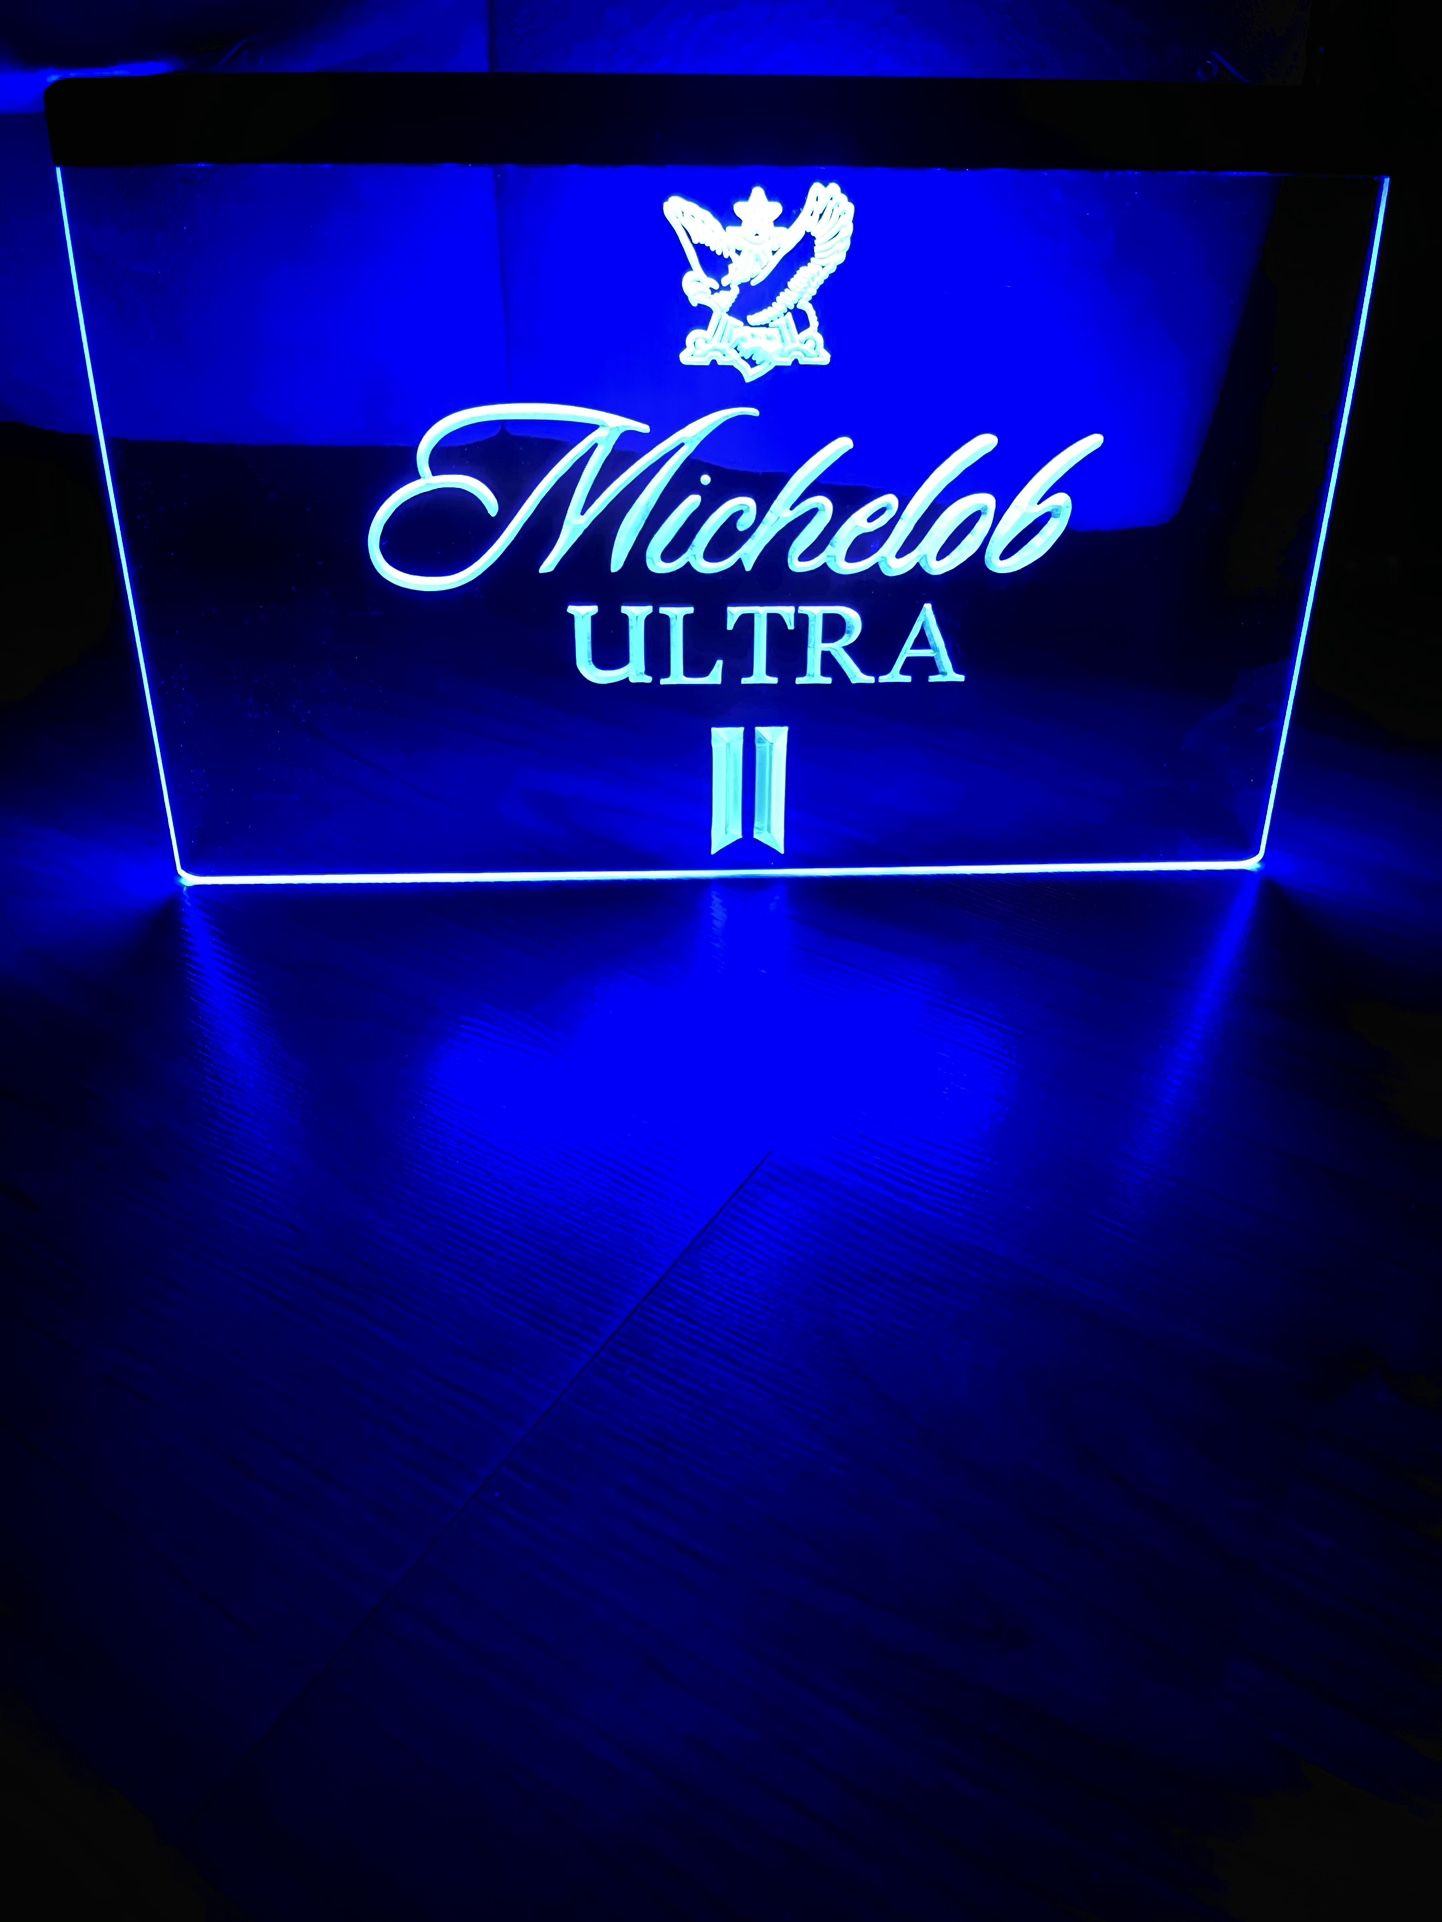 MICHELOB ULTRA LED NEON BLUE LIGHT SIGN 8x12